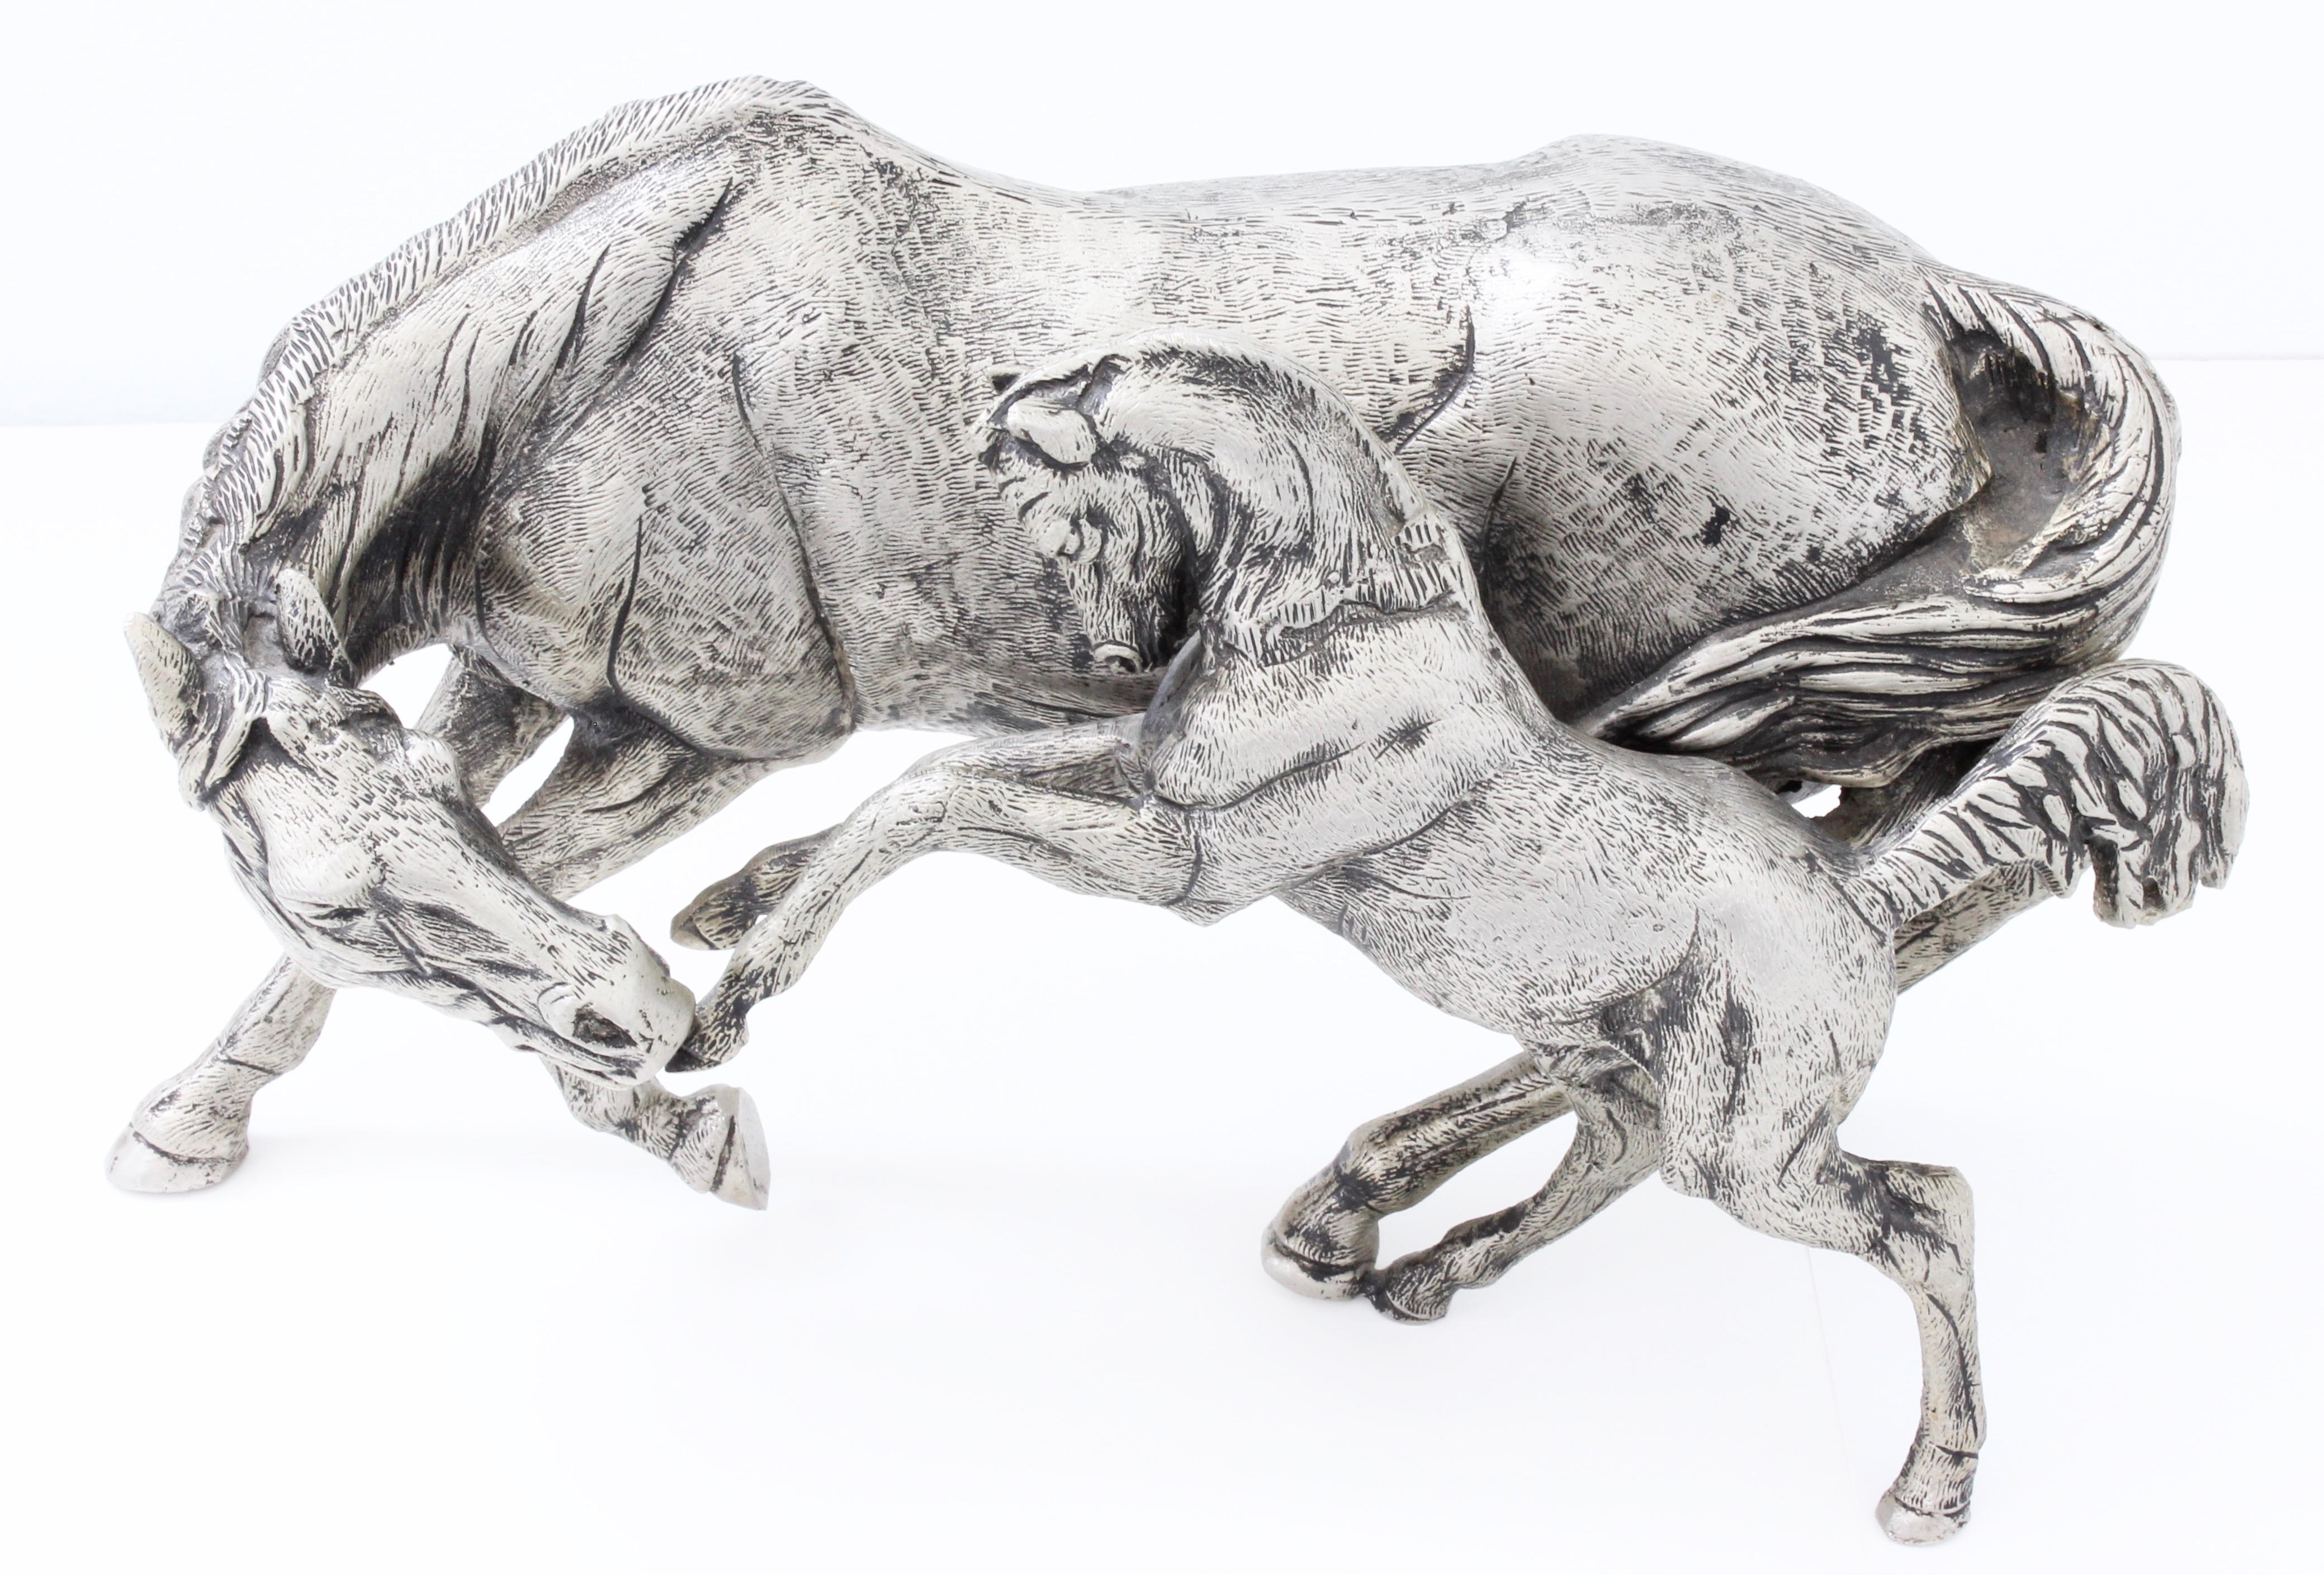 This lovely figural sculpture was made by Gucci Italy, most likely in the 1970s.  Made from a silver plated metal, it features a wonderful mare with her playful foal.  Perfect for the collector, interior designer, equestrian or animal lover, this